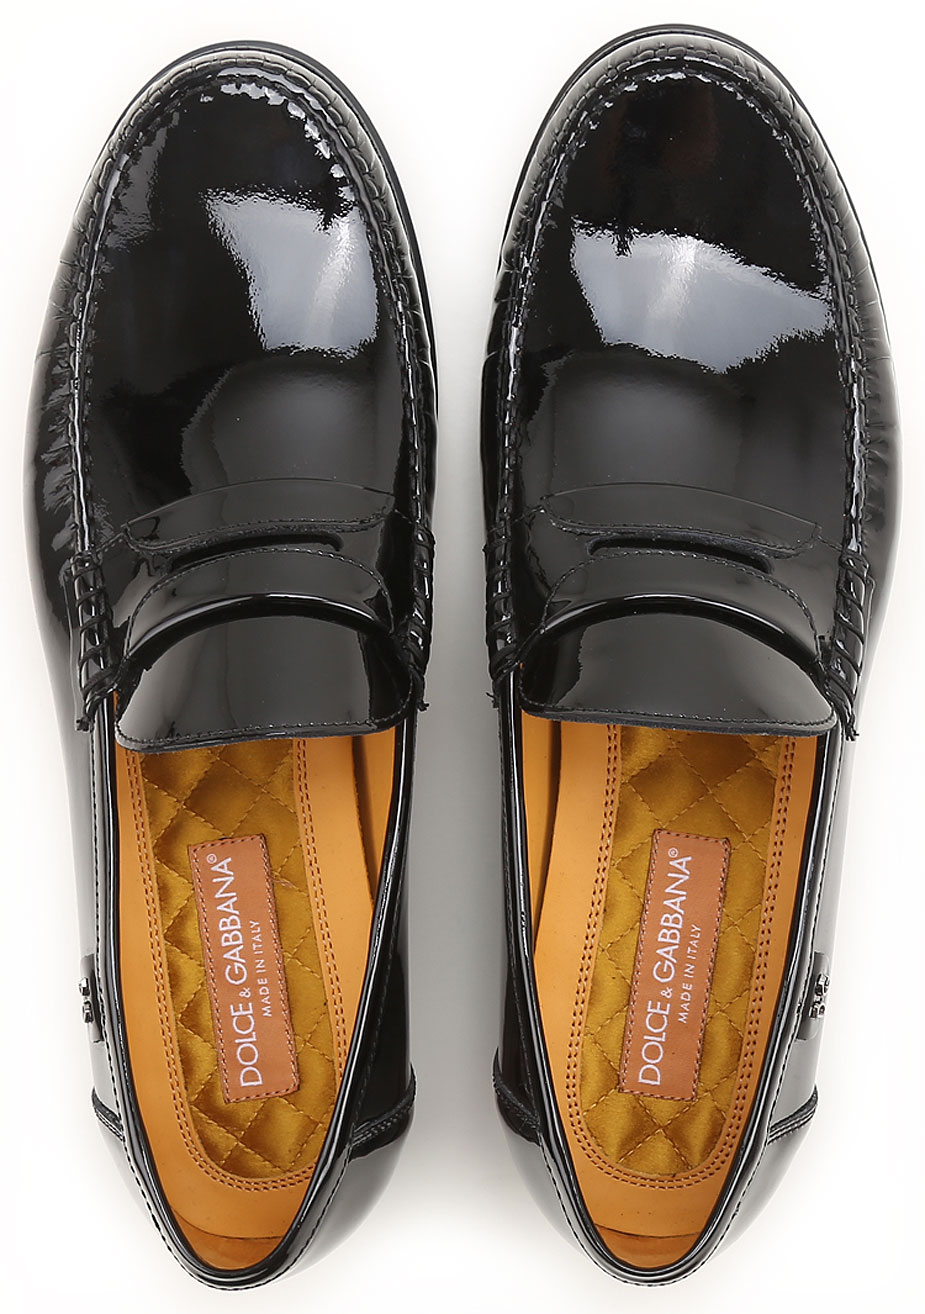 Mens Shoes Dolce & Gabbana, Style code: a30003-a1153-80999